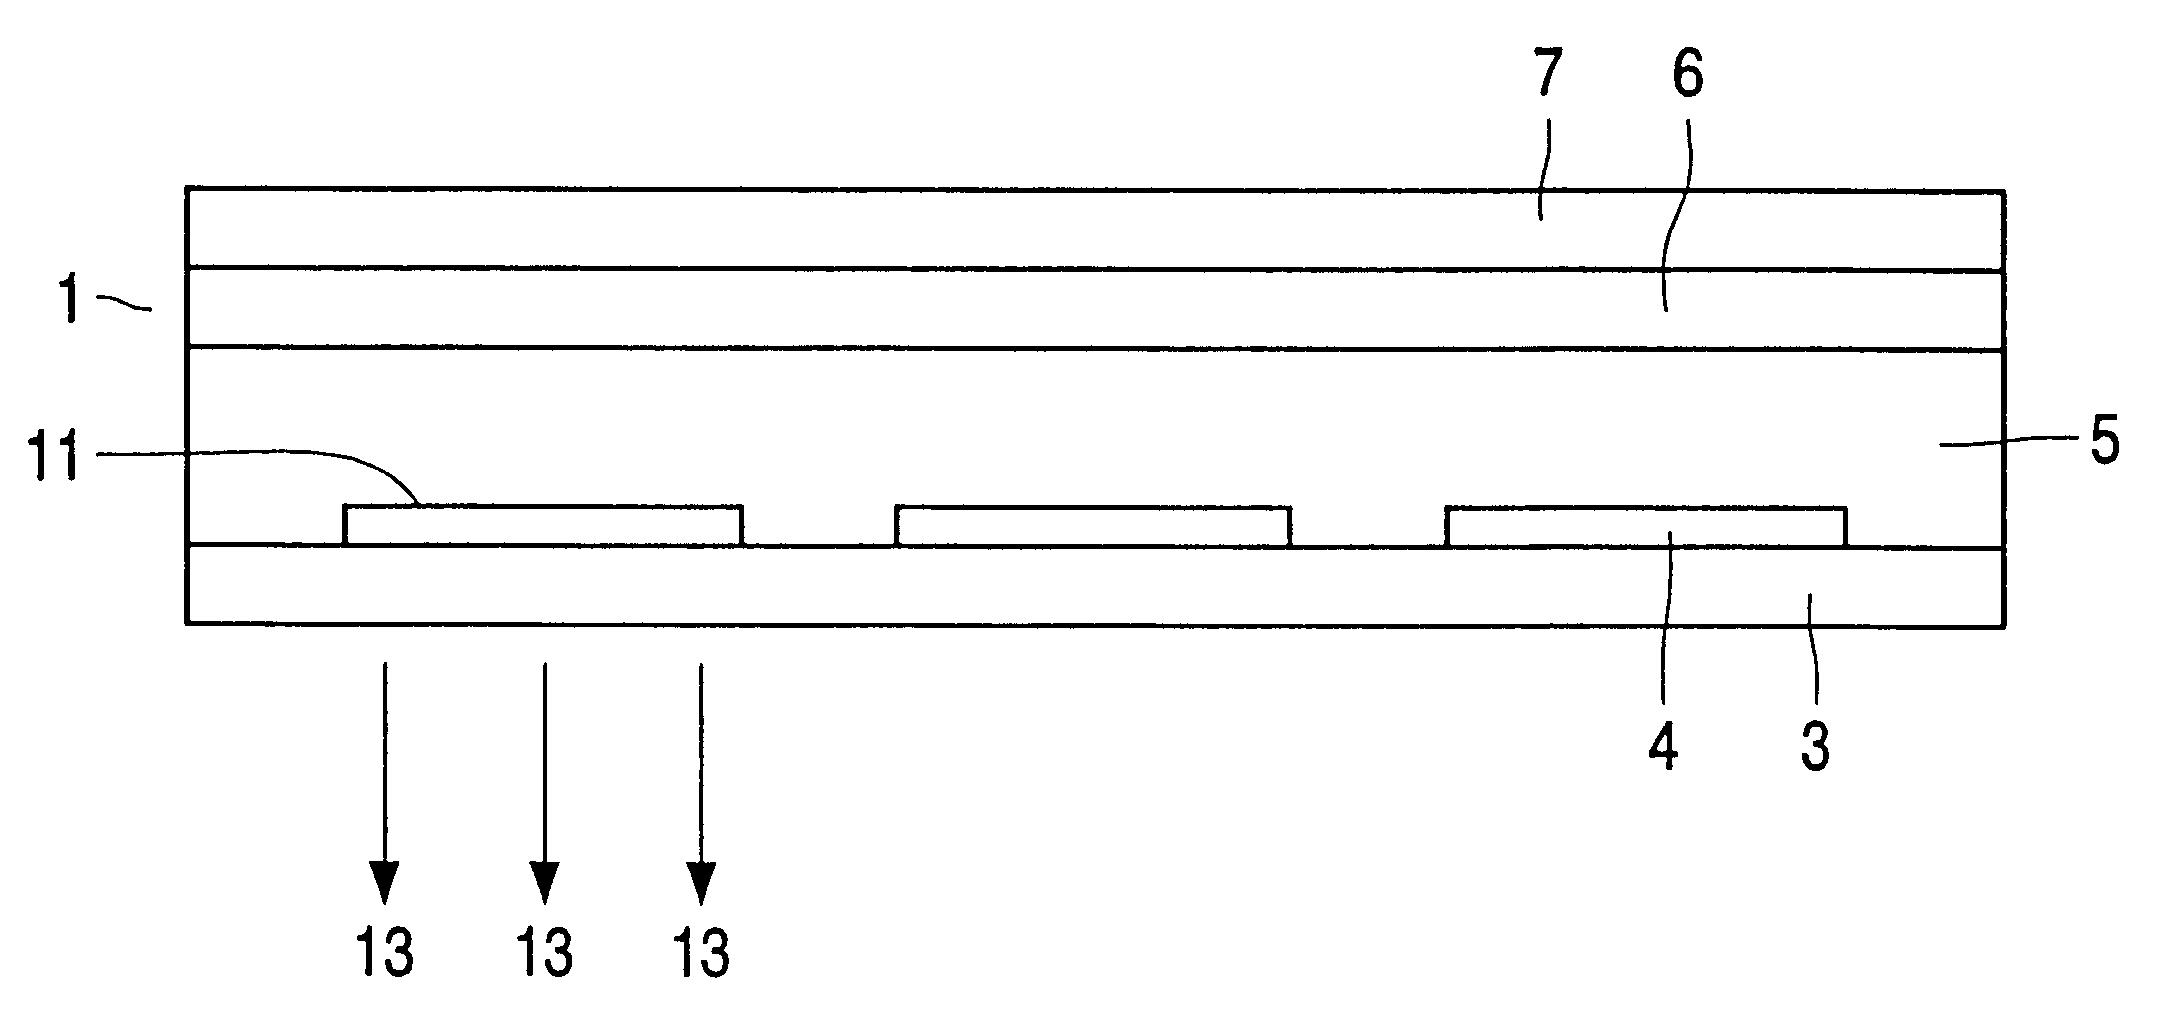 Led comprising a conductive transparent polymer layer with low sulfate and high metal ion content